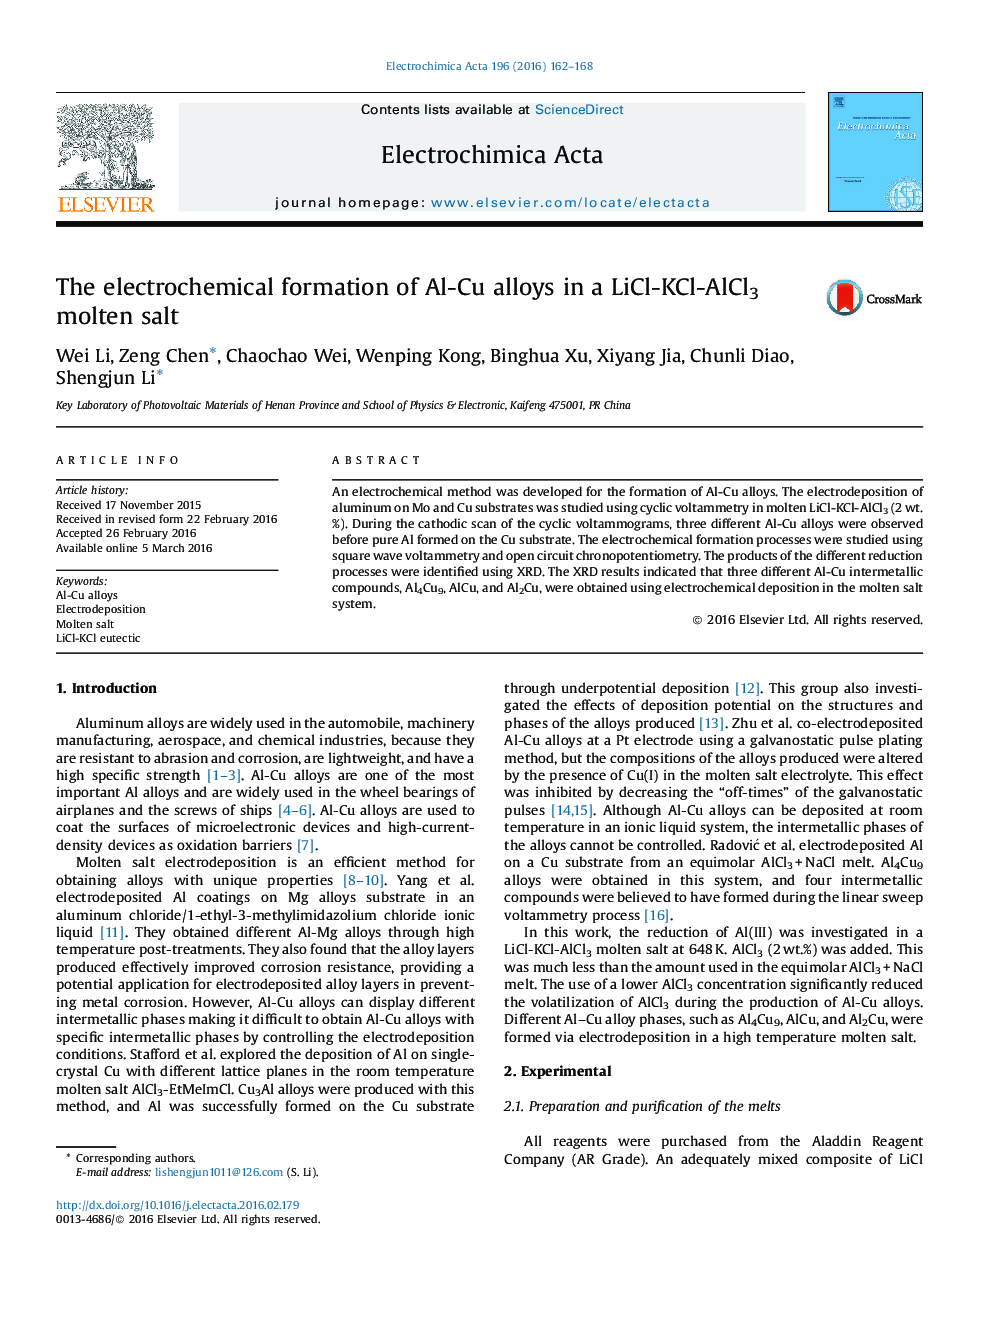 The electrochemical formation of Al-Cu alloys in a LiCl-KCl-AlCl3 molten salt